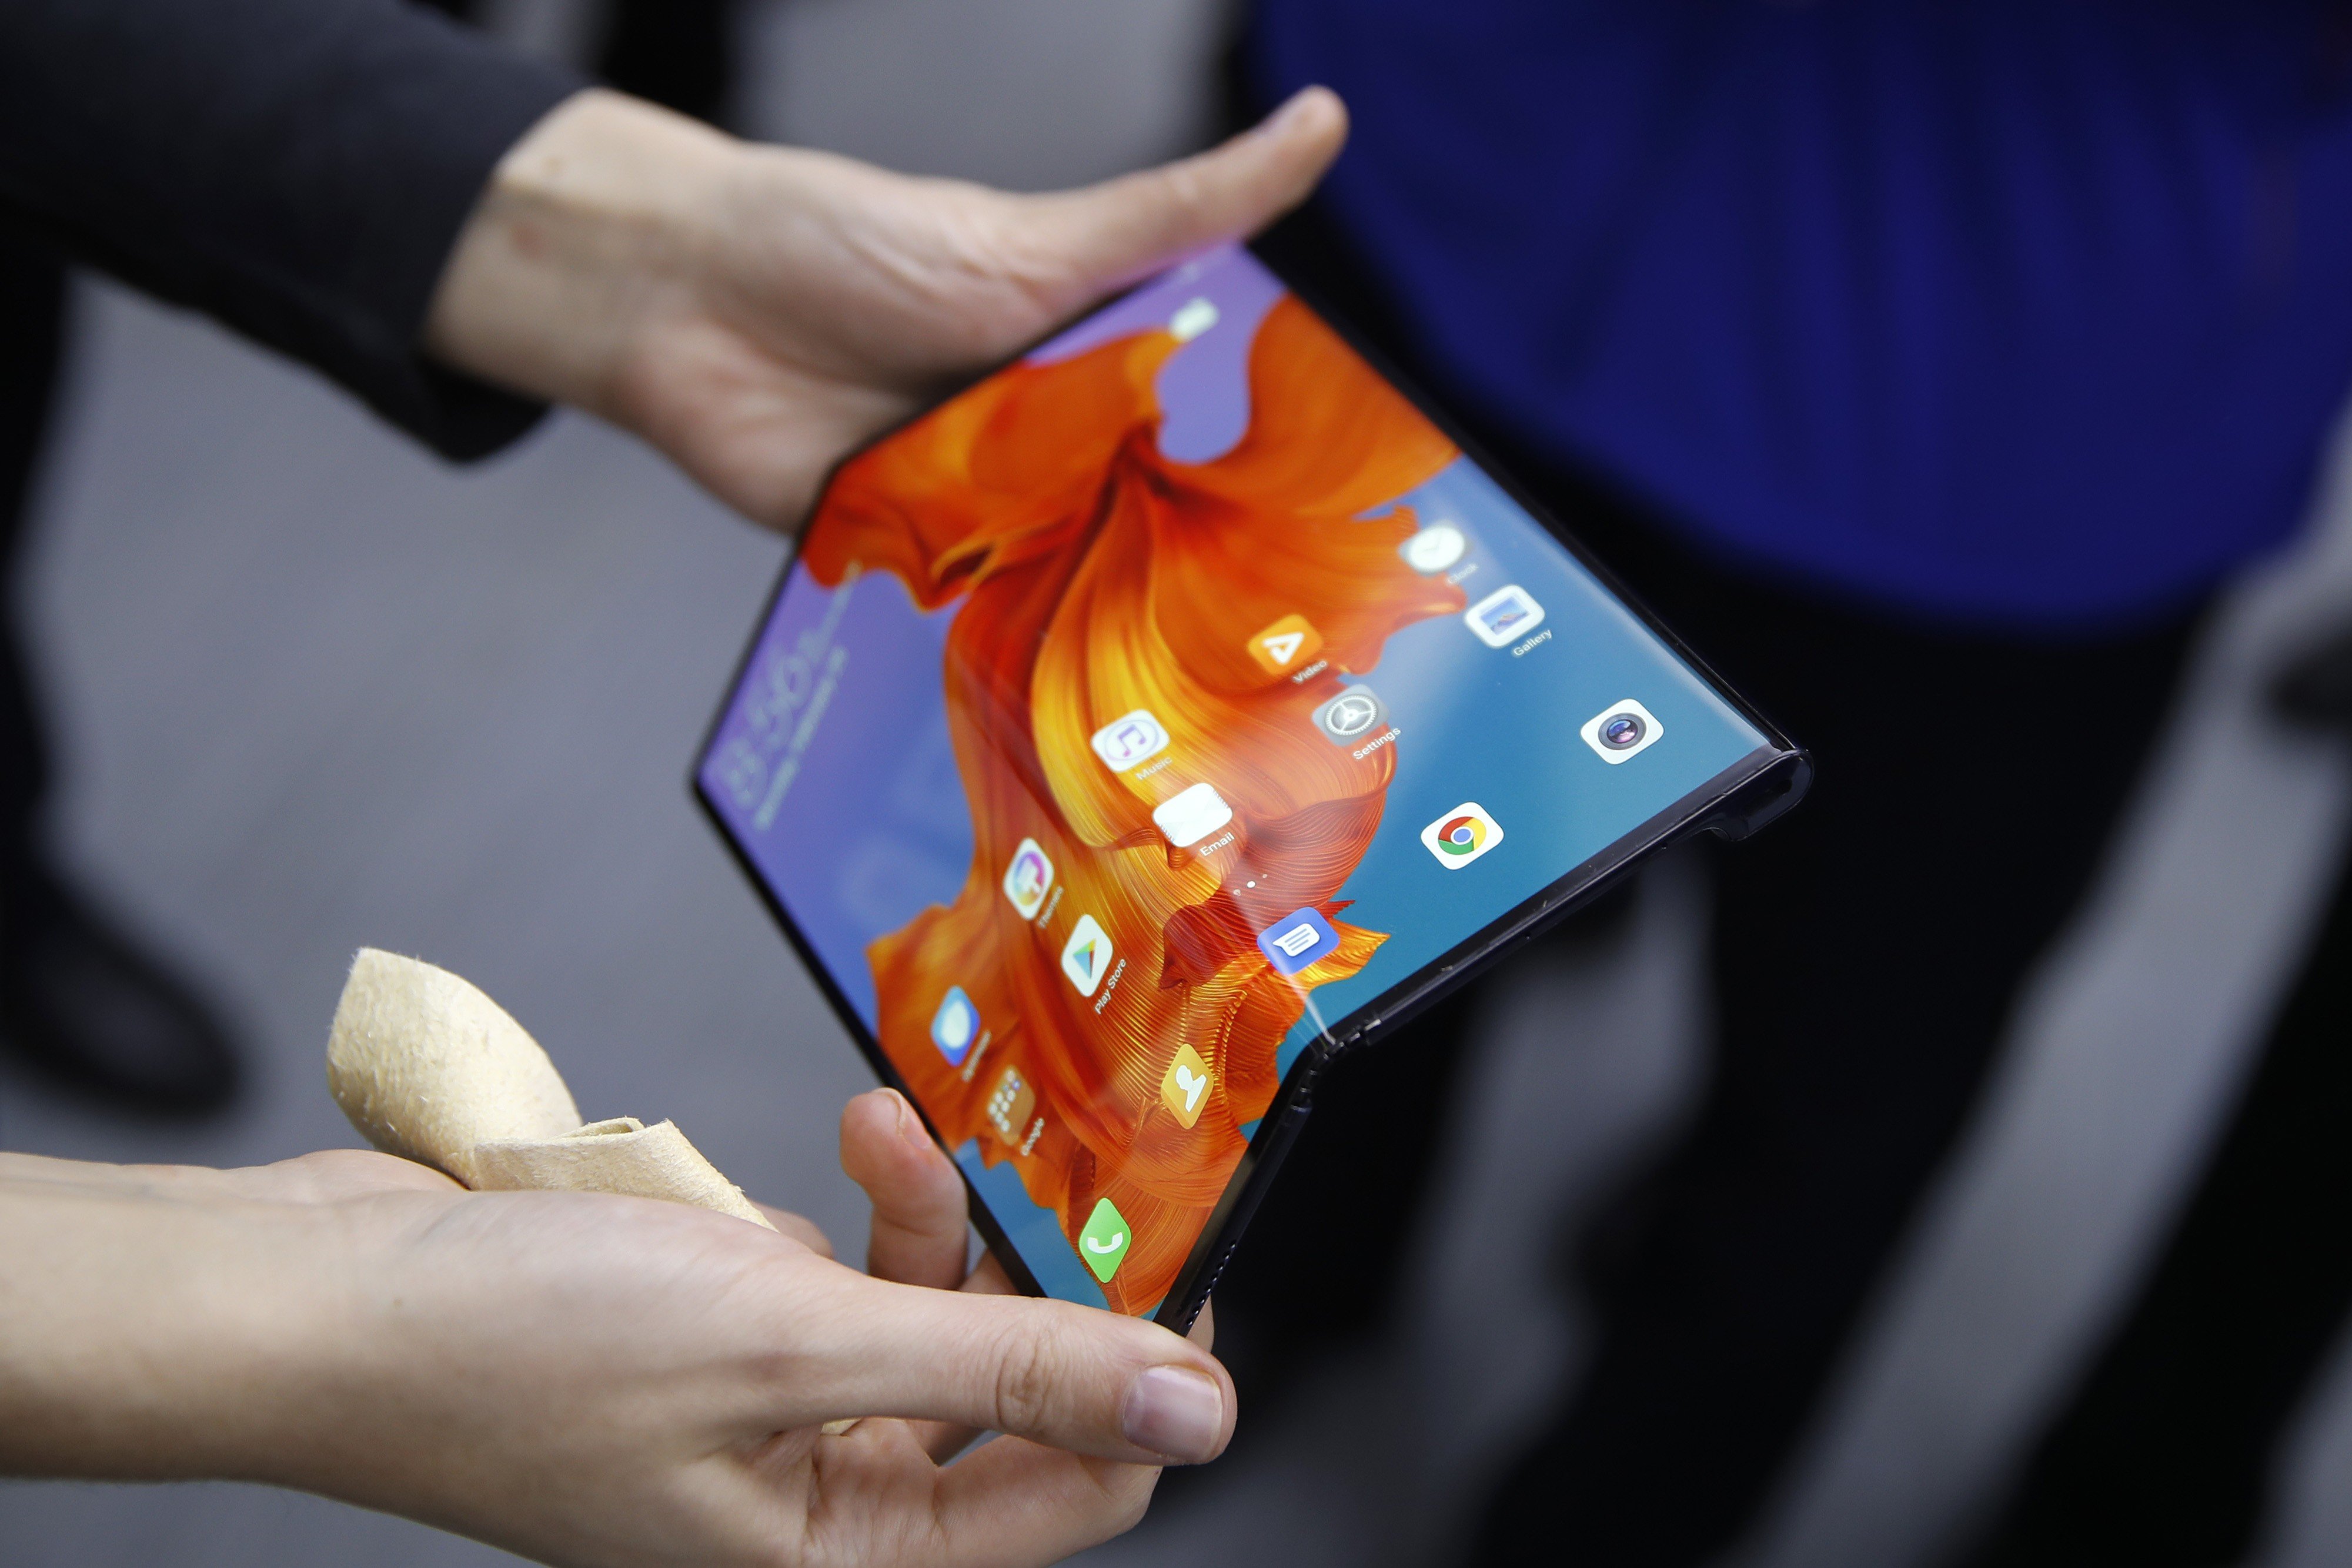 An employee demonstrates a Mate X foldable 5G mobile device at the Huawei Technologies Co. pavilion on the opening day of the MWC Barcelona in Barcelona, Spain. Photo: Bloomberg